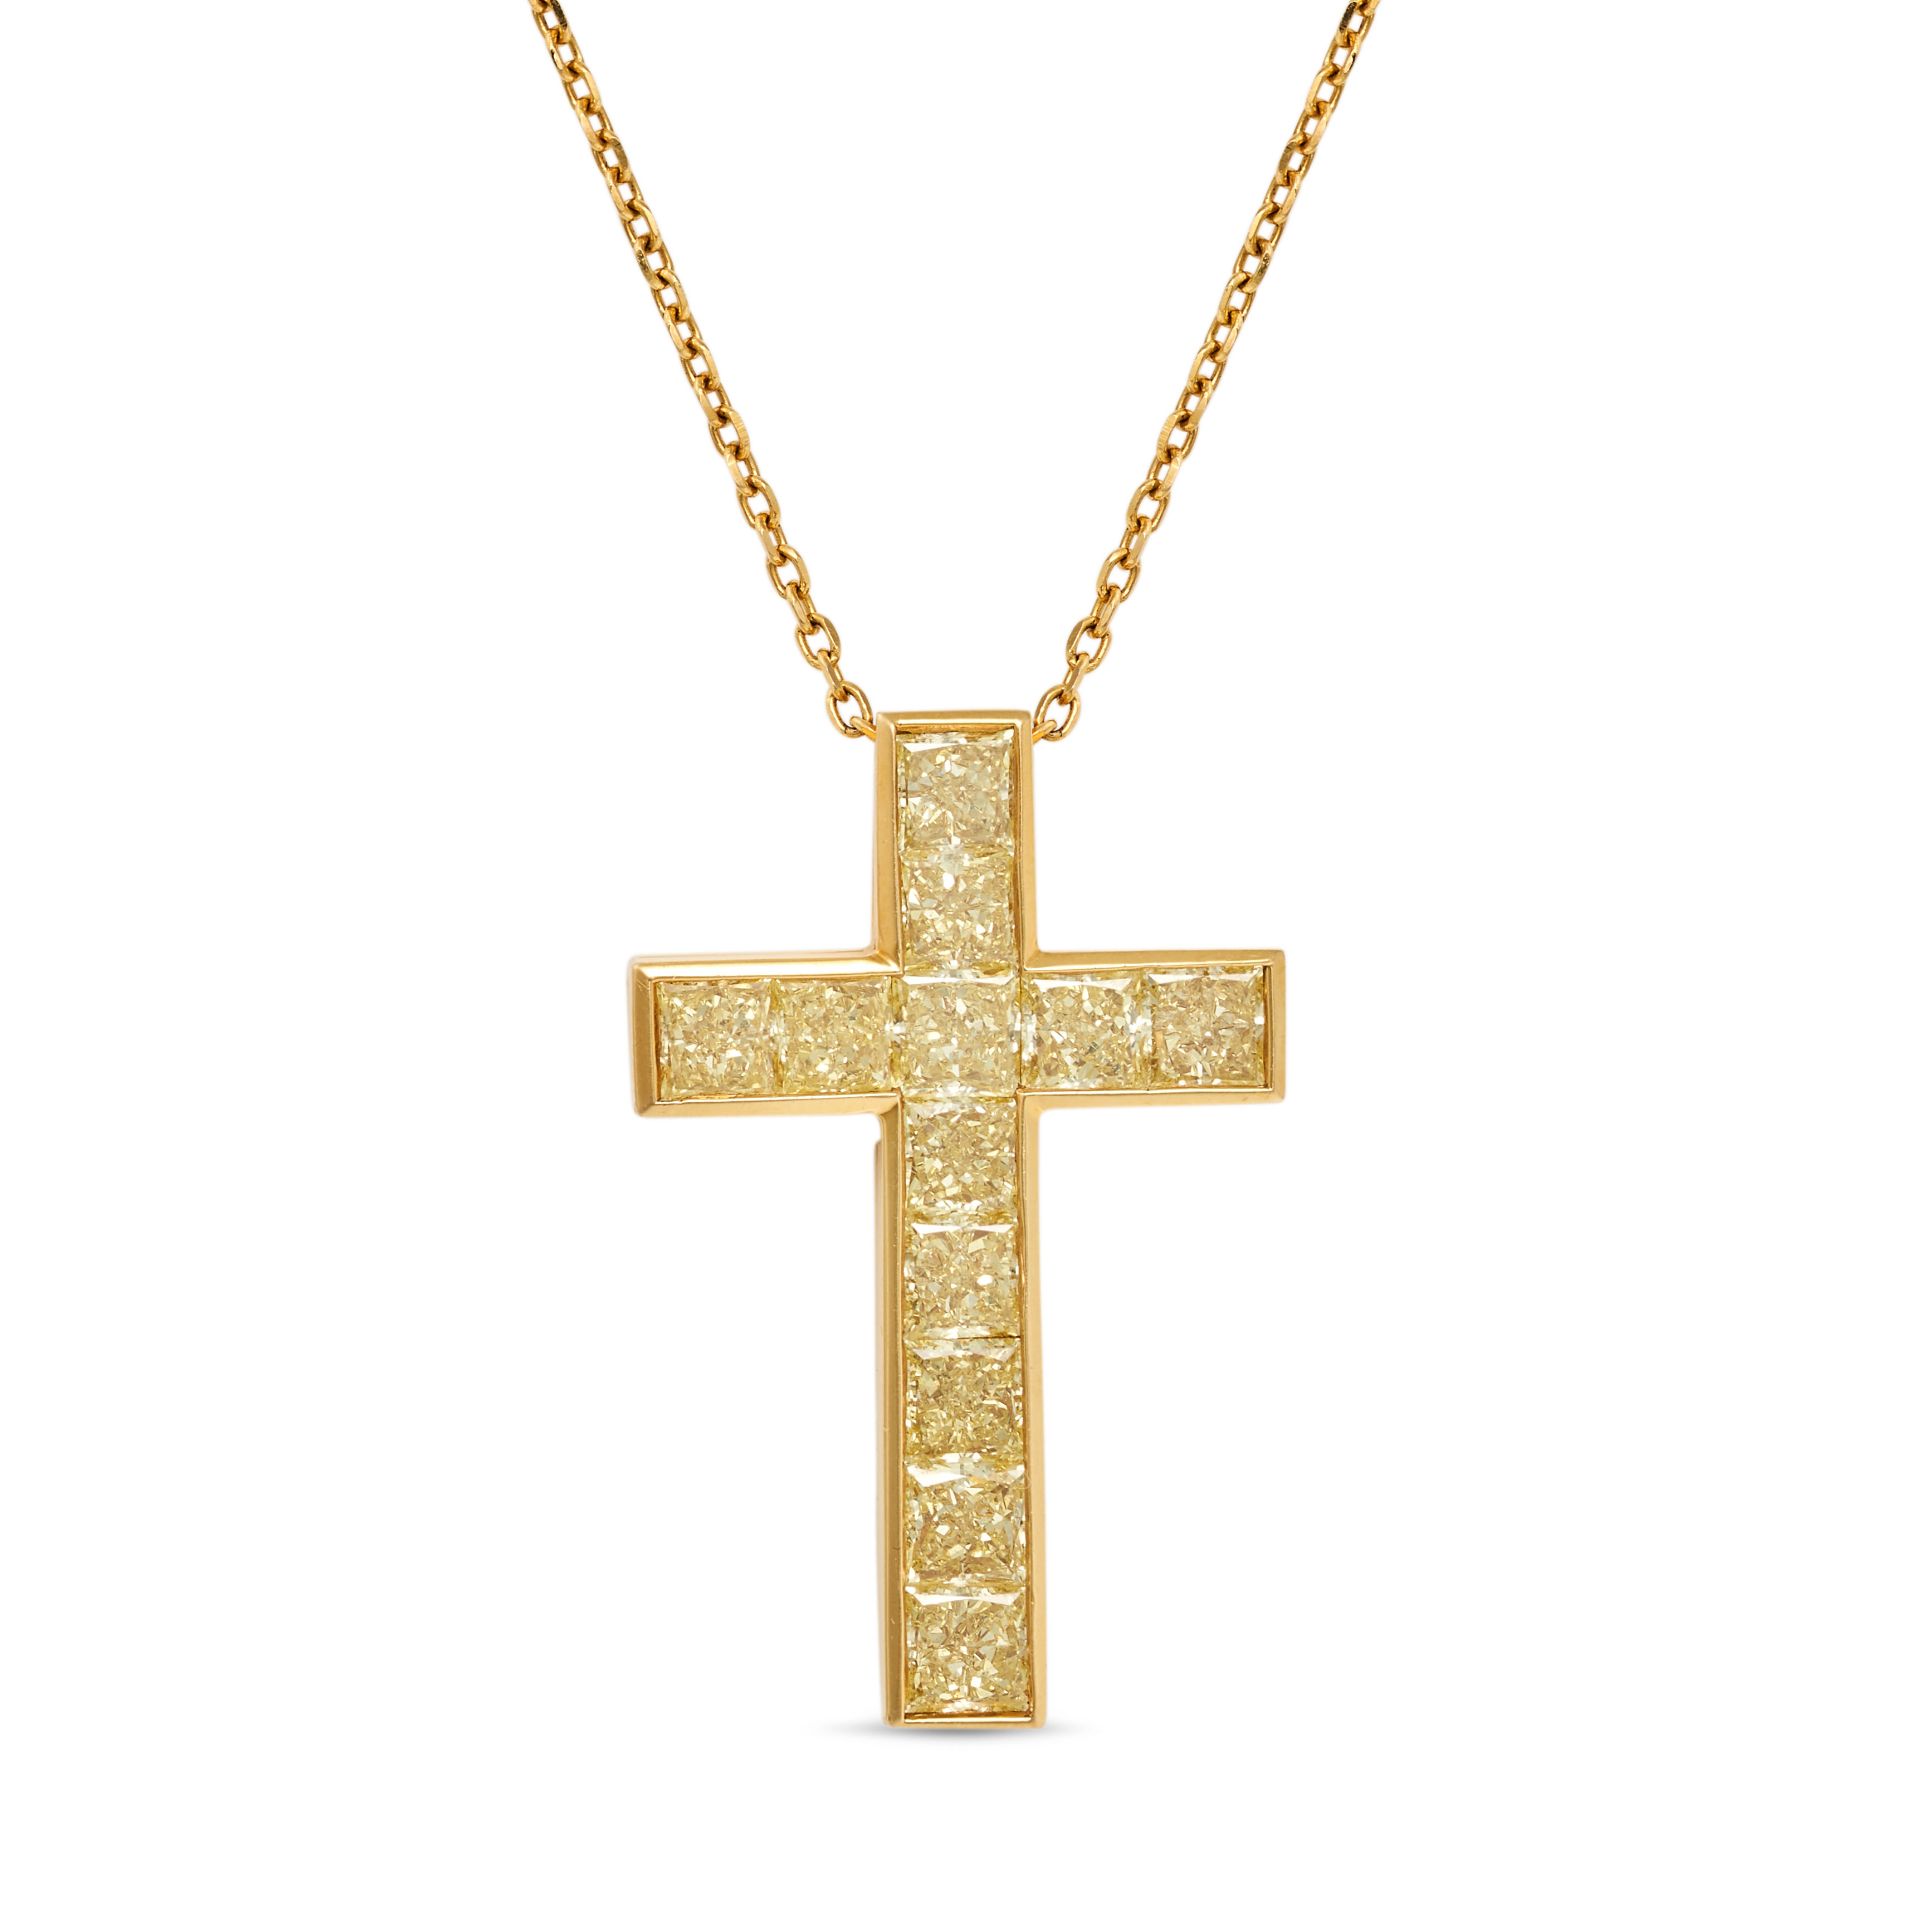 A YELLOW DIAMOND CROSS PENDANT NECKLACE in 18ct yellow gold, the pendant designed as a cross set ...